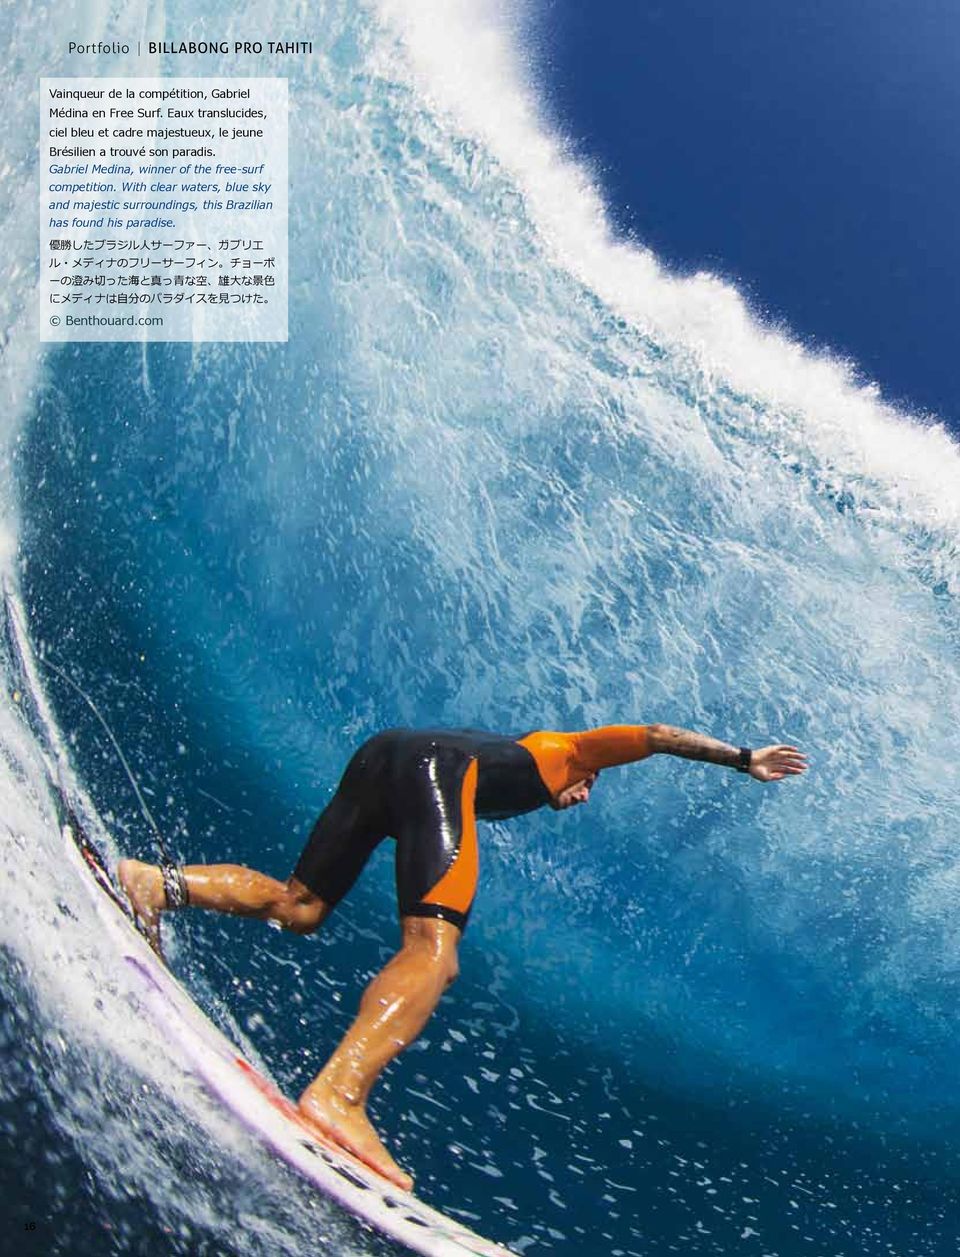 Gabriel Medina, winner of the free-surf competition.